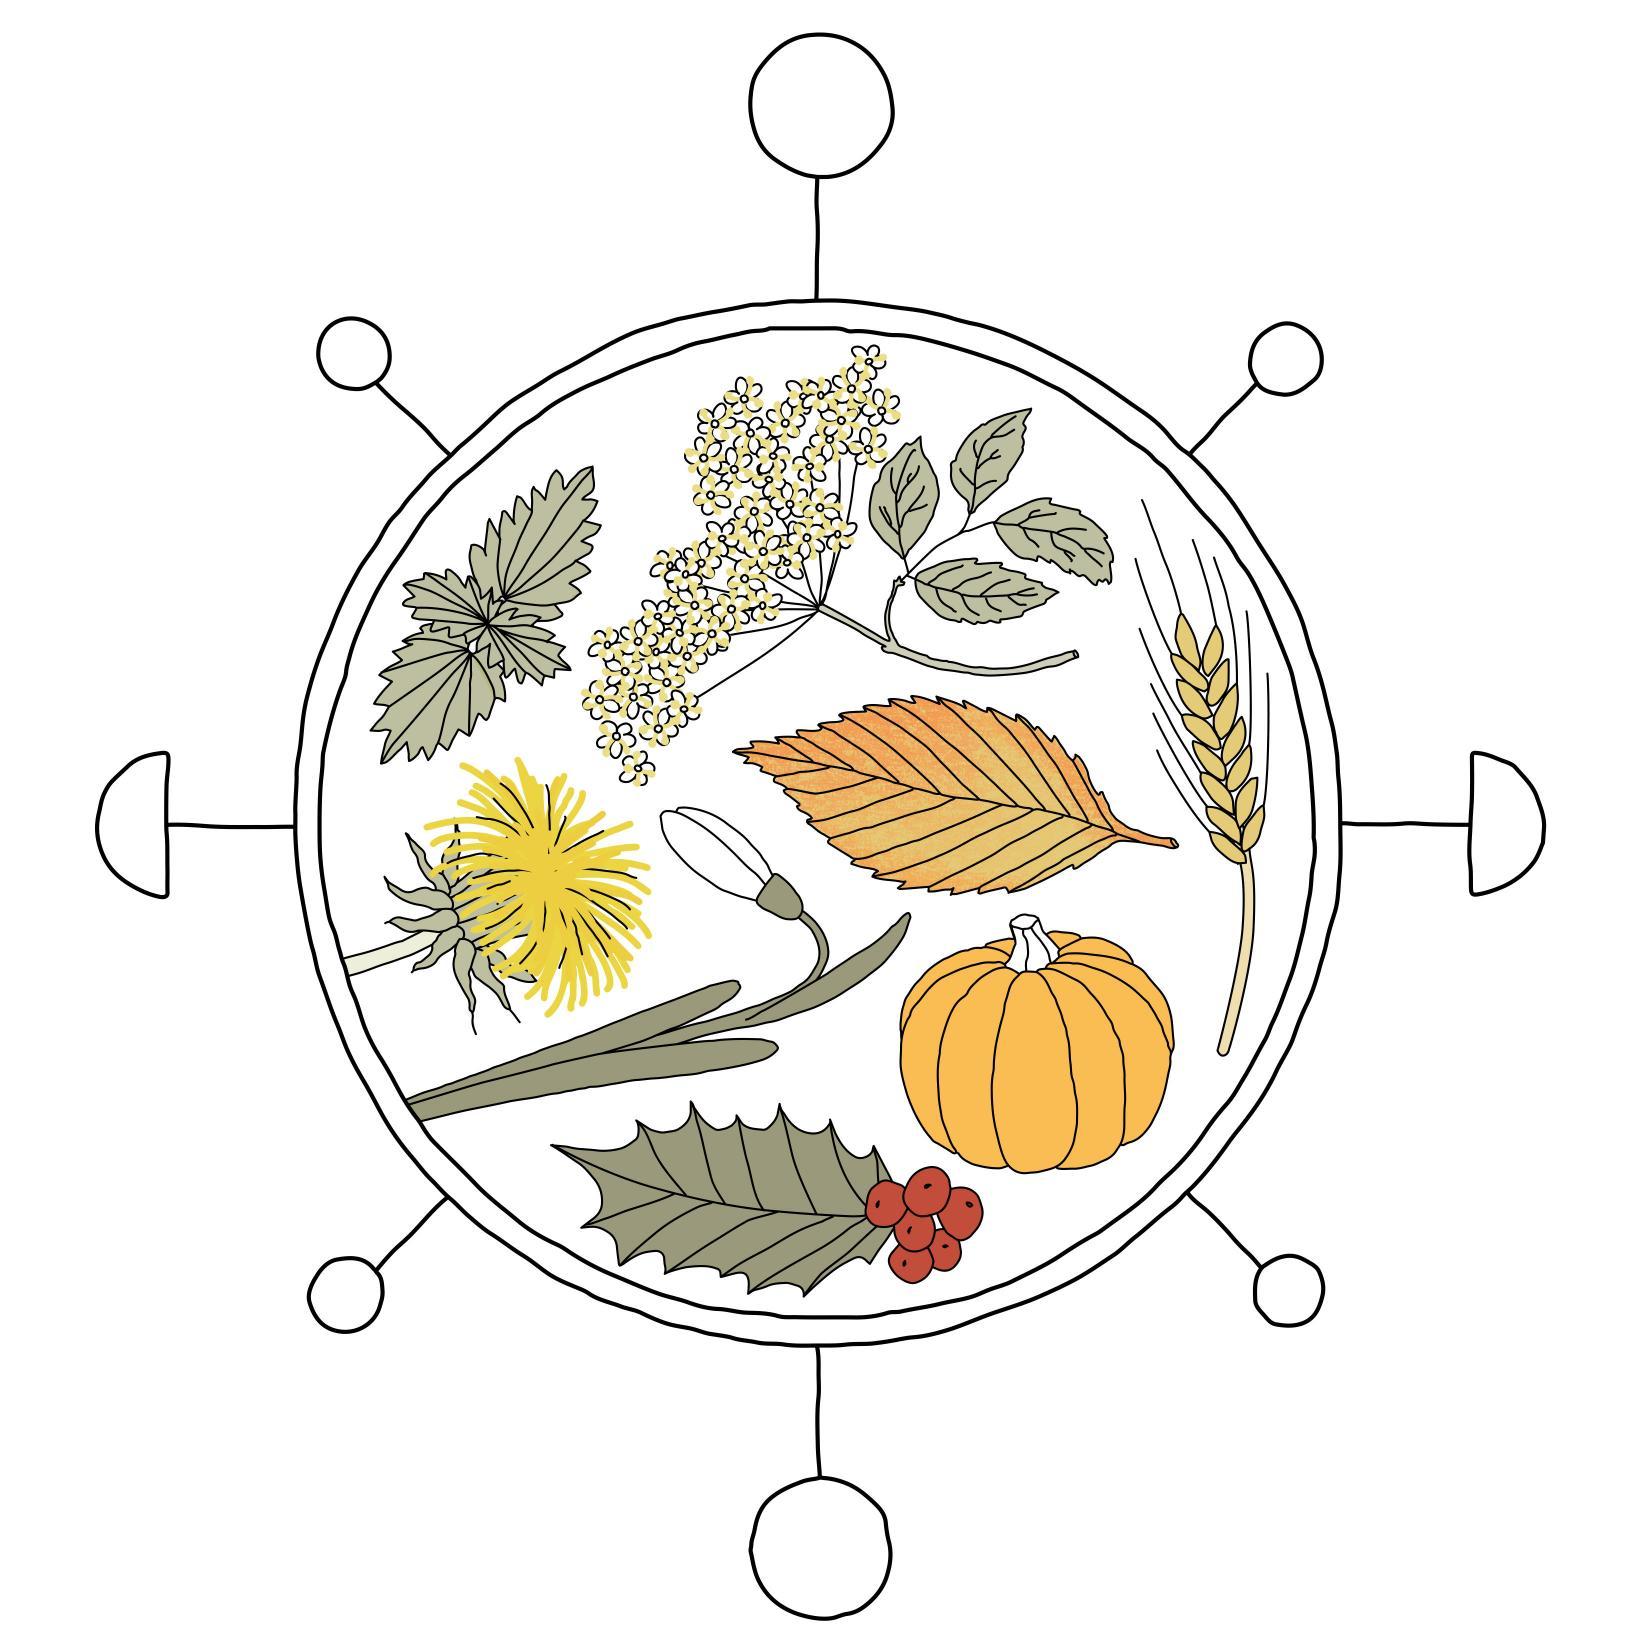 Newsletter about using the cycle of the seasons to structure and celebrate your life.